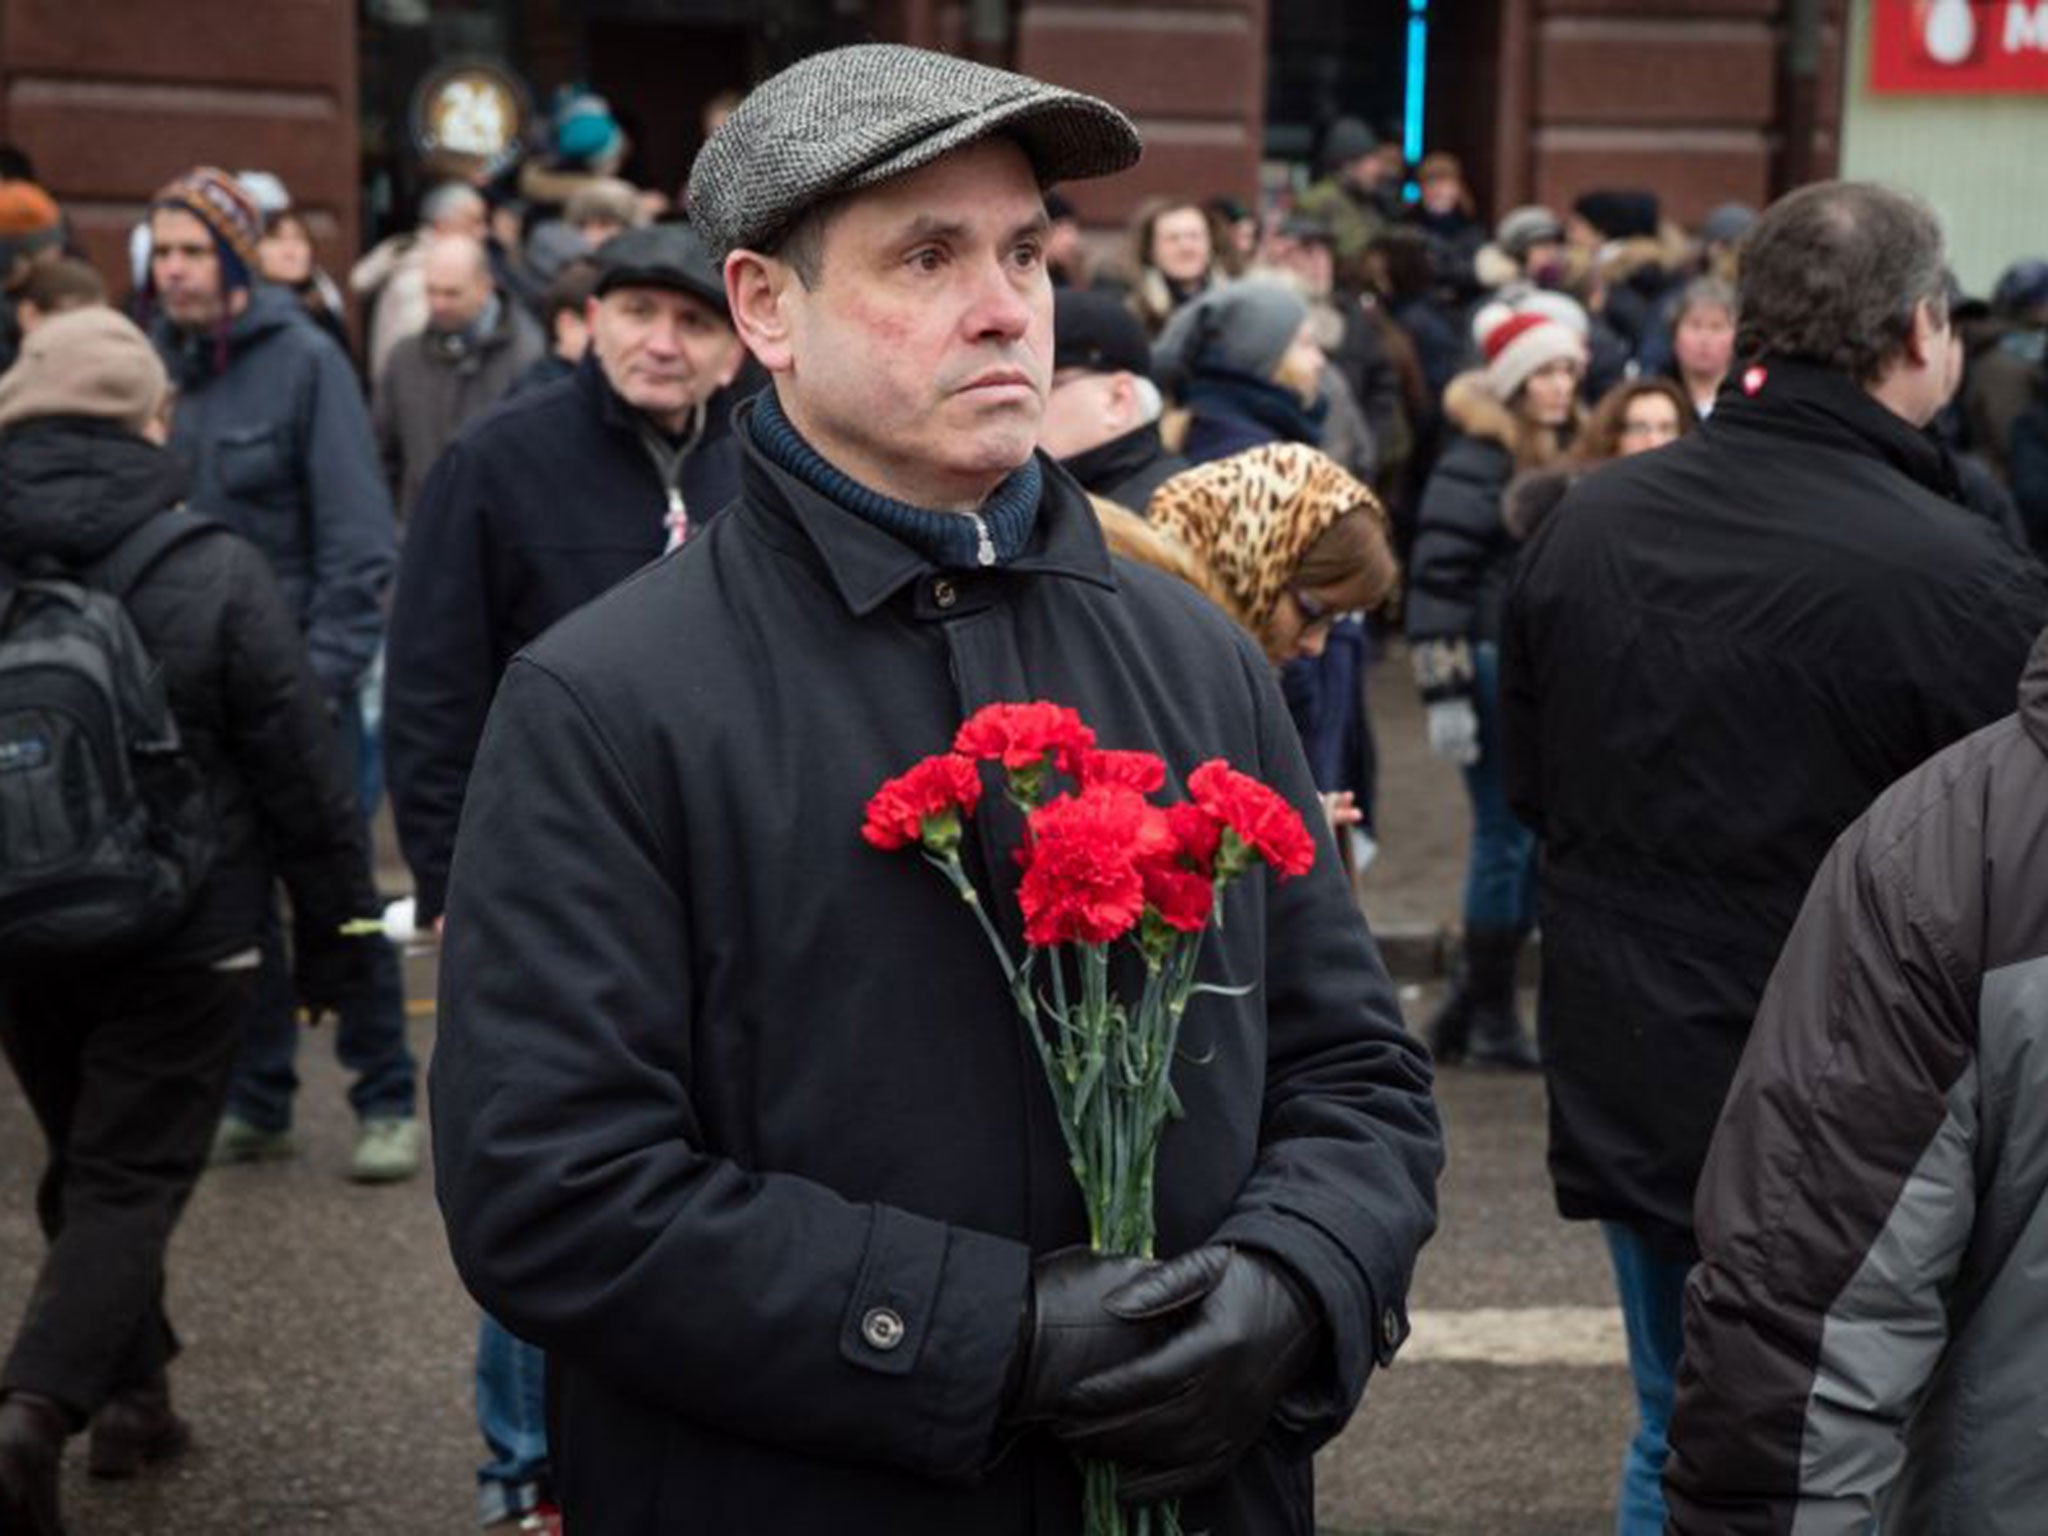 Thousands of Russians gathered in a central Moscow square to protest the killing of leading opposition politician Boris Nemtsov